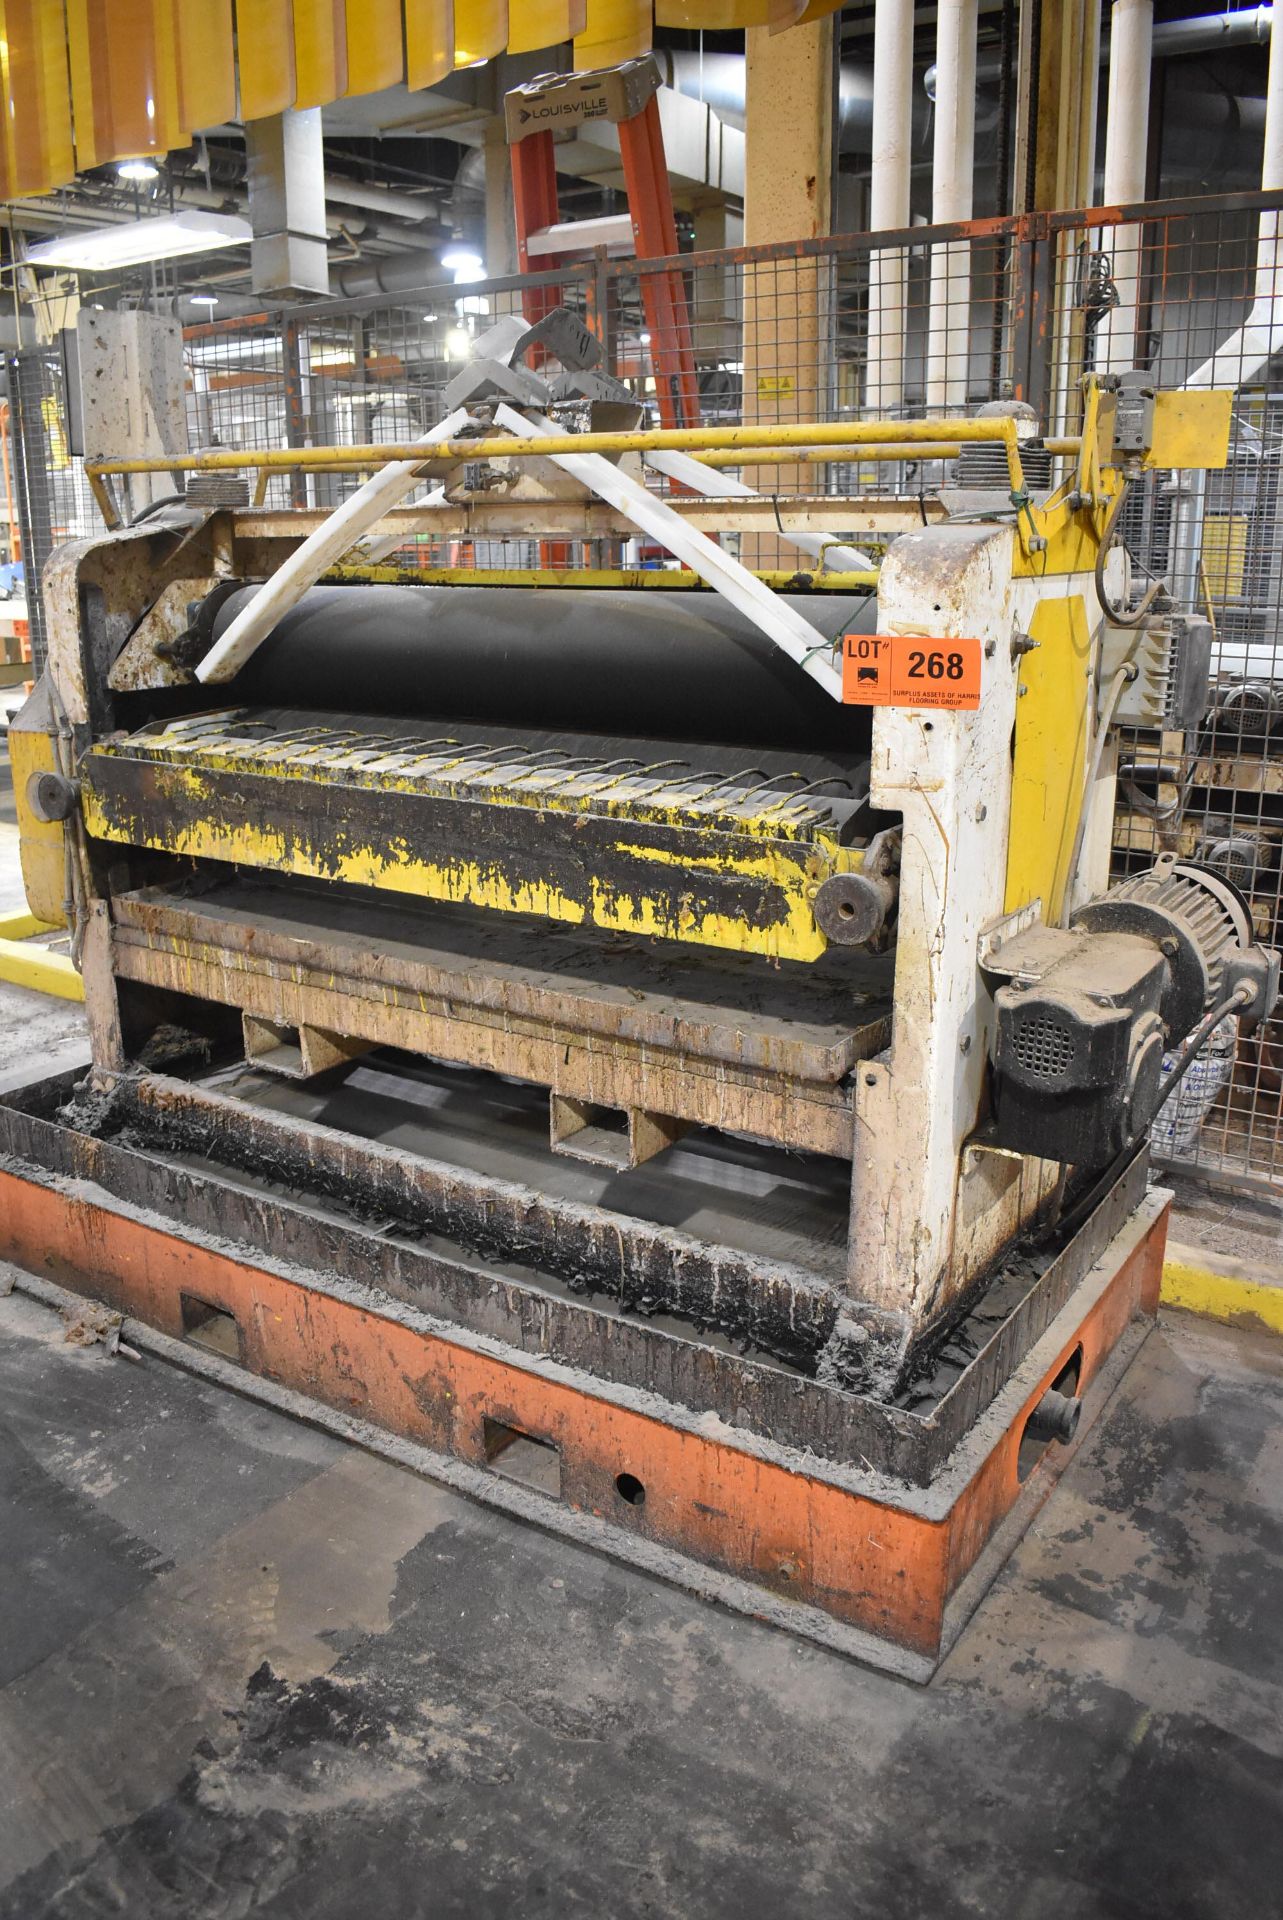 MFG. UNKNOWN 55" ROLL-FEED ADHESIVE APPLICATOR, S/N: N/A (CI) [RIGGING FEE FOR LOT #268 - $375 USD